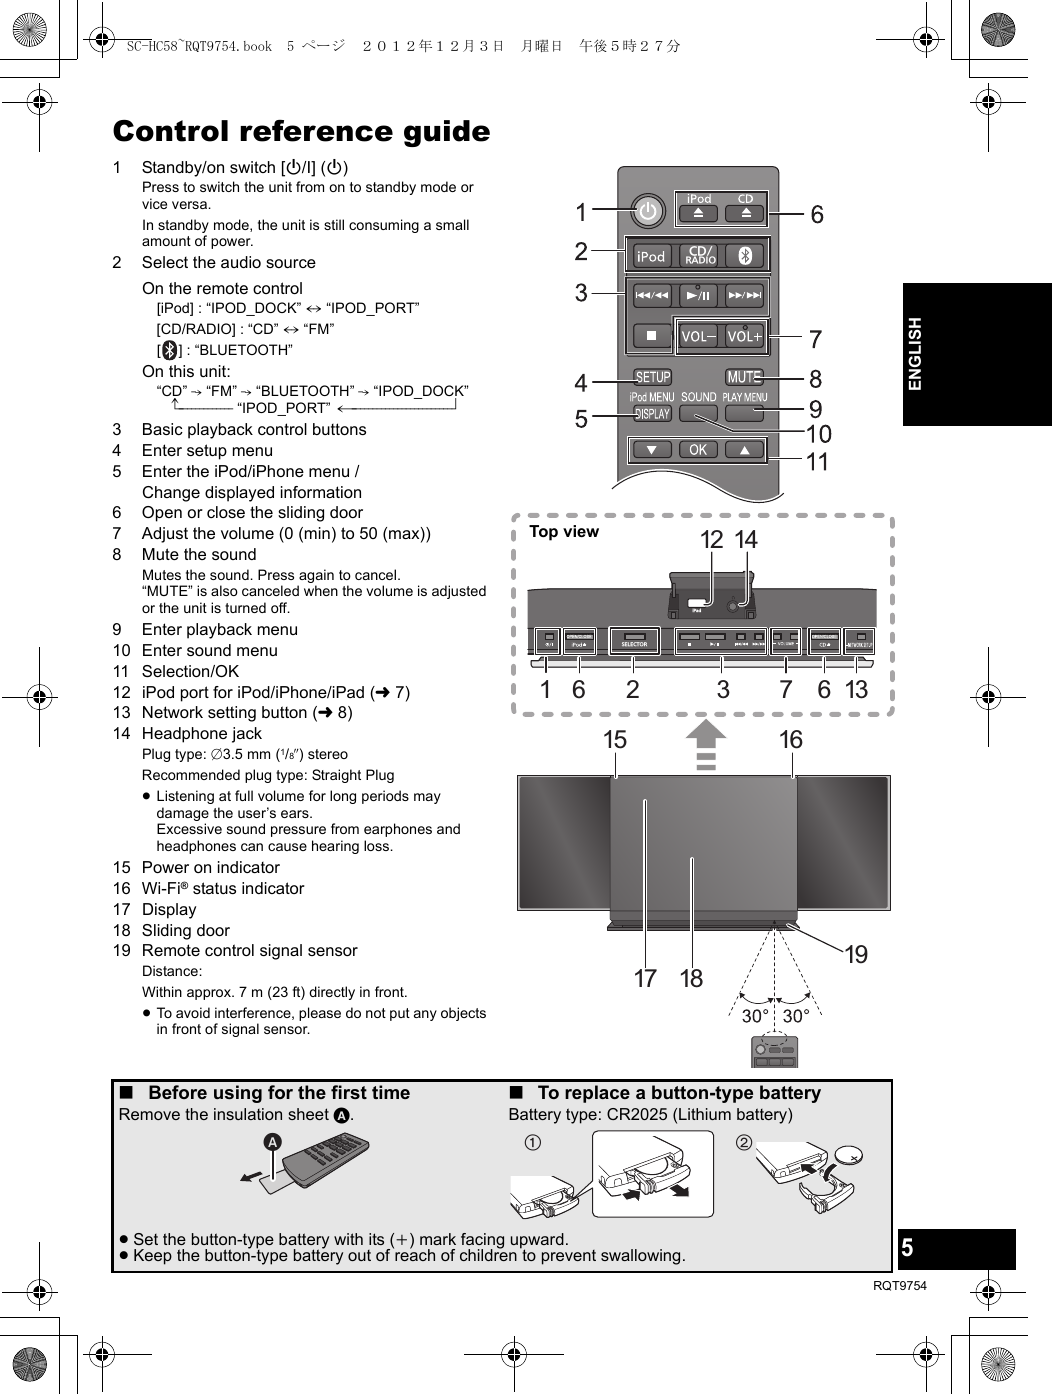 5RQT9754ENGLISHControl reference guide1 Standby/on switch [Í/I] (Í)Press to switch the unit from on to standby mode or vice versa.In standby mode, the unit is still consuming a small amount of power.2 Select the audio sourceOn the remote control[iPod] : “IPOD_DOCK” ,. “IPOD_PORT”[CD/RADIO] : “CD” ,. “FM”[ ] : “BLUETOOTH”On this unit:“CD” -. “FM” -. “BLUETOOTH” -. “IPOD_DOCK”^------------- “IPOD_PORT” (------------------------b3 Basic playback control buttons4 Enter setup menu5 Enter the iPod/iPhone menu / Change displayed information6 Open or close the sliding door7 Adjust the volume (0 (min) to 50 (max))8 Mute the soundMutes the sound. Press again to cancel. “MUTE” is also canceled when the volume is adjusted or the unit is turned off.9 Enter playback menu10 Enter sound menu11 Selection/OK 12 iPod port for iPod/iPhone/iPad (l7)13 Network setting button (l8)14 Headphone jackPlug type: ‰3.5 mm (1/8q) stereoRecommended plug type: Straight Plug≥Listening at full volume for long periods may damage the user’s ears.Excessive sound pressure from earphones and headphones can cause hearing loss.15 Power on indicator16 Wi-Fi® status indicator17 Display18 Sliding door19 Remote control signal sensorDistance:Within approx. 7 m (23 ft) directly in front.≥To avoid interference, please do not put any objects in front of signal sensor.CD/RADIOSELECTORiPad12136732161517 18 191416Top view∫Before using for the first timeRemove the insulation sheet A.∫To replace a button-type batteryBattery type: CR2025 (Lithium battery)≥Set the button-type battery with its (i) mark facing upward.≥Keep the button-type battery out of reach of children to prevent swallowing.SC-HC58~RQT9754.book  5 ページ  ２０１２年１２月３日　月曜日　午後５時２７分